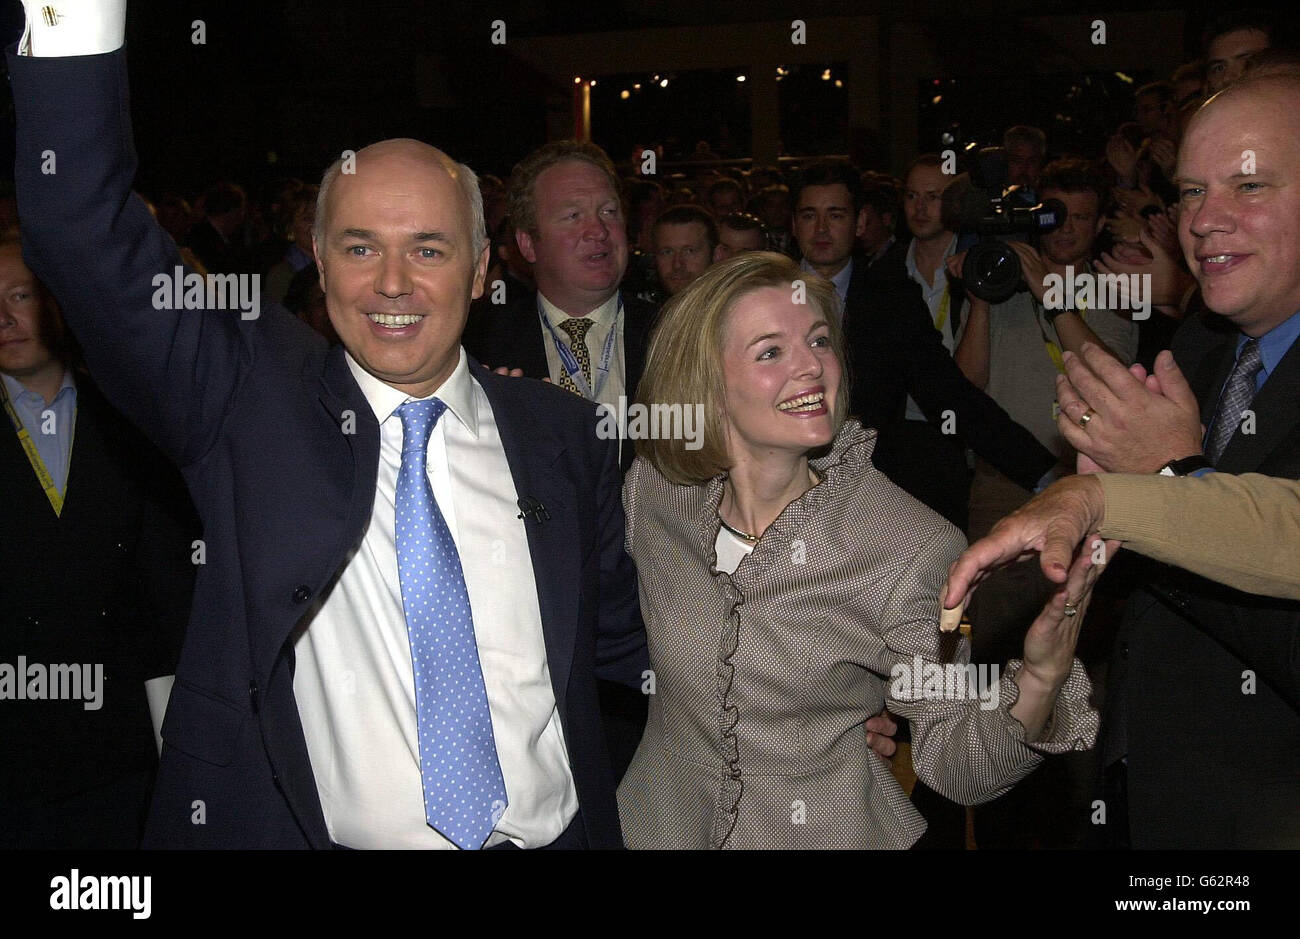 Conservative Party leader Iain Duncan Smith with his wife Betsy wave to the crowds after his address to the Conservative Party Conference in Bounemouth. Stock Photo